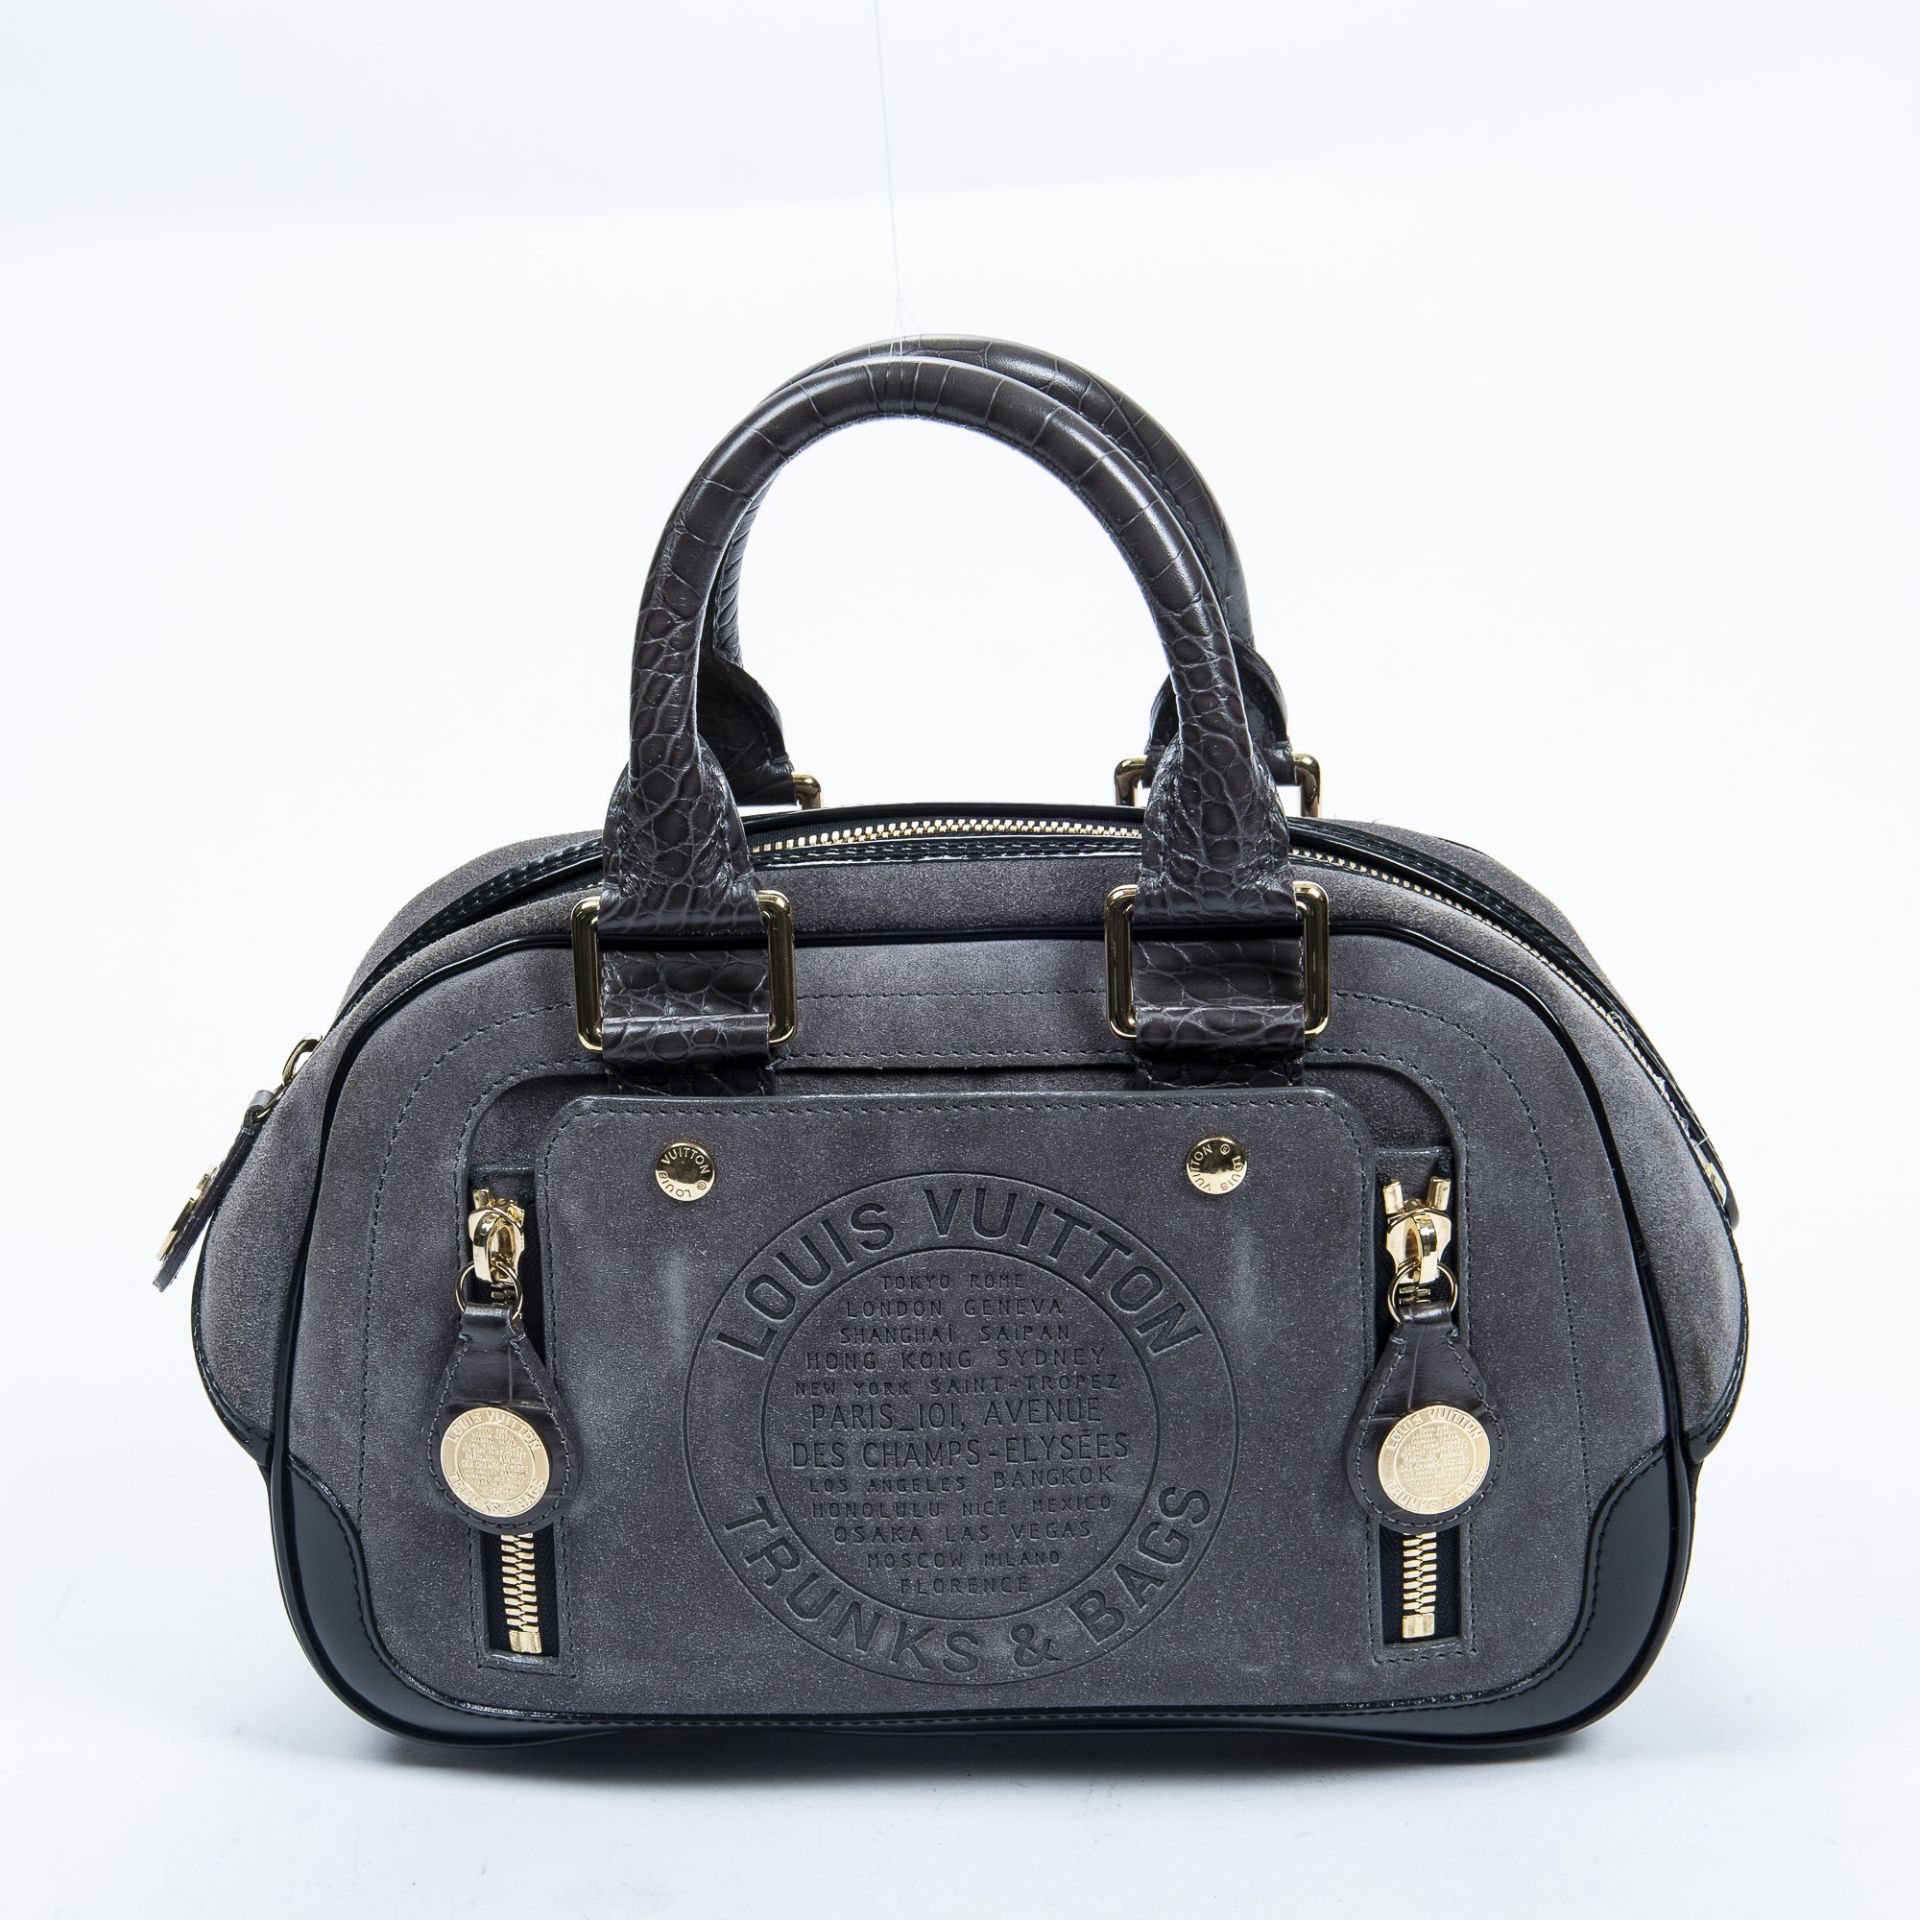 RRP £1,200.00 Lot To Contain 1 Louis Vuitton Calf Leather Ltd. Ed. "Marc Jacobs 2006" Havane Stamped